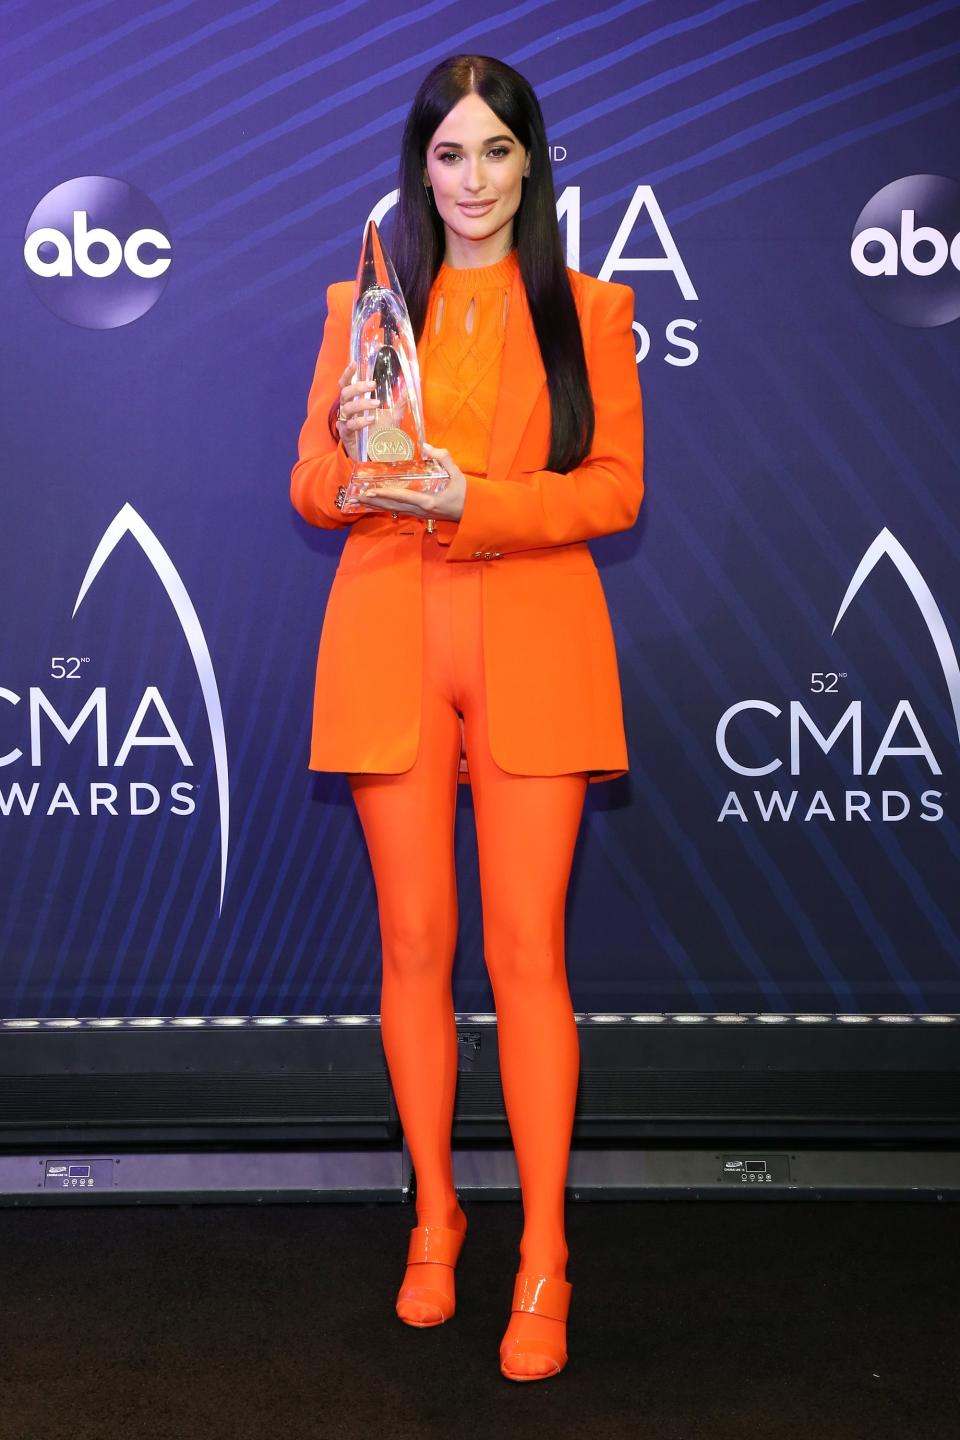 Kacey Musgraves poses with an award at the 52nd annual CMA Awards